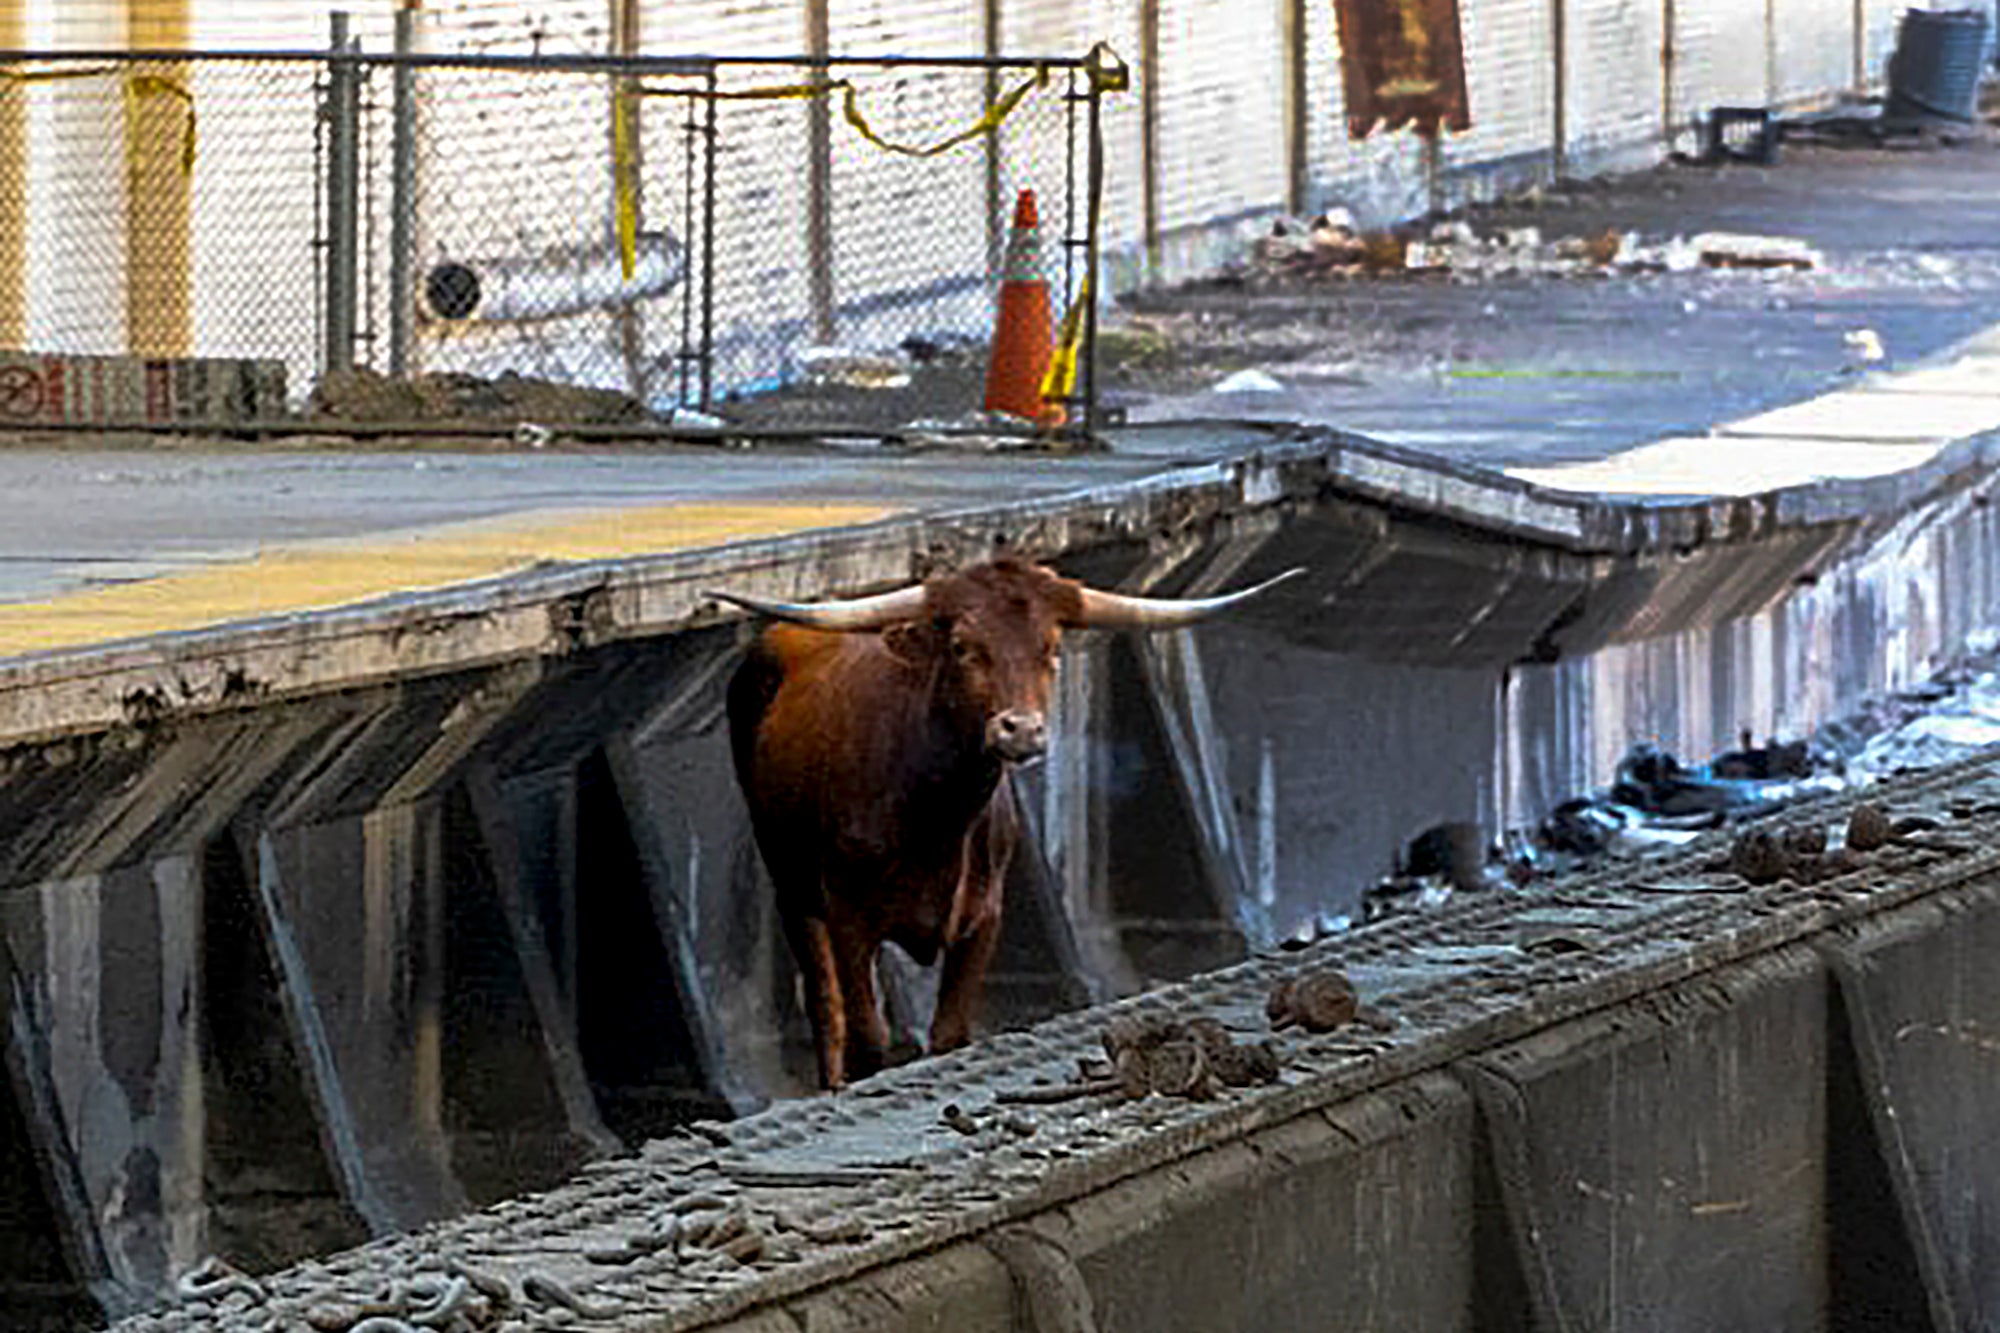 A bull stands on the tracks at Newark Penn Station.